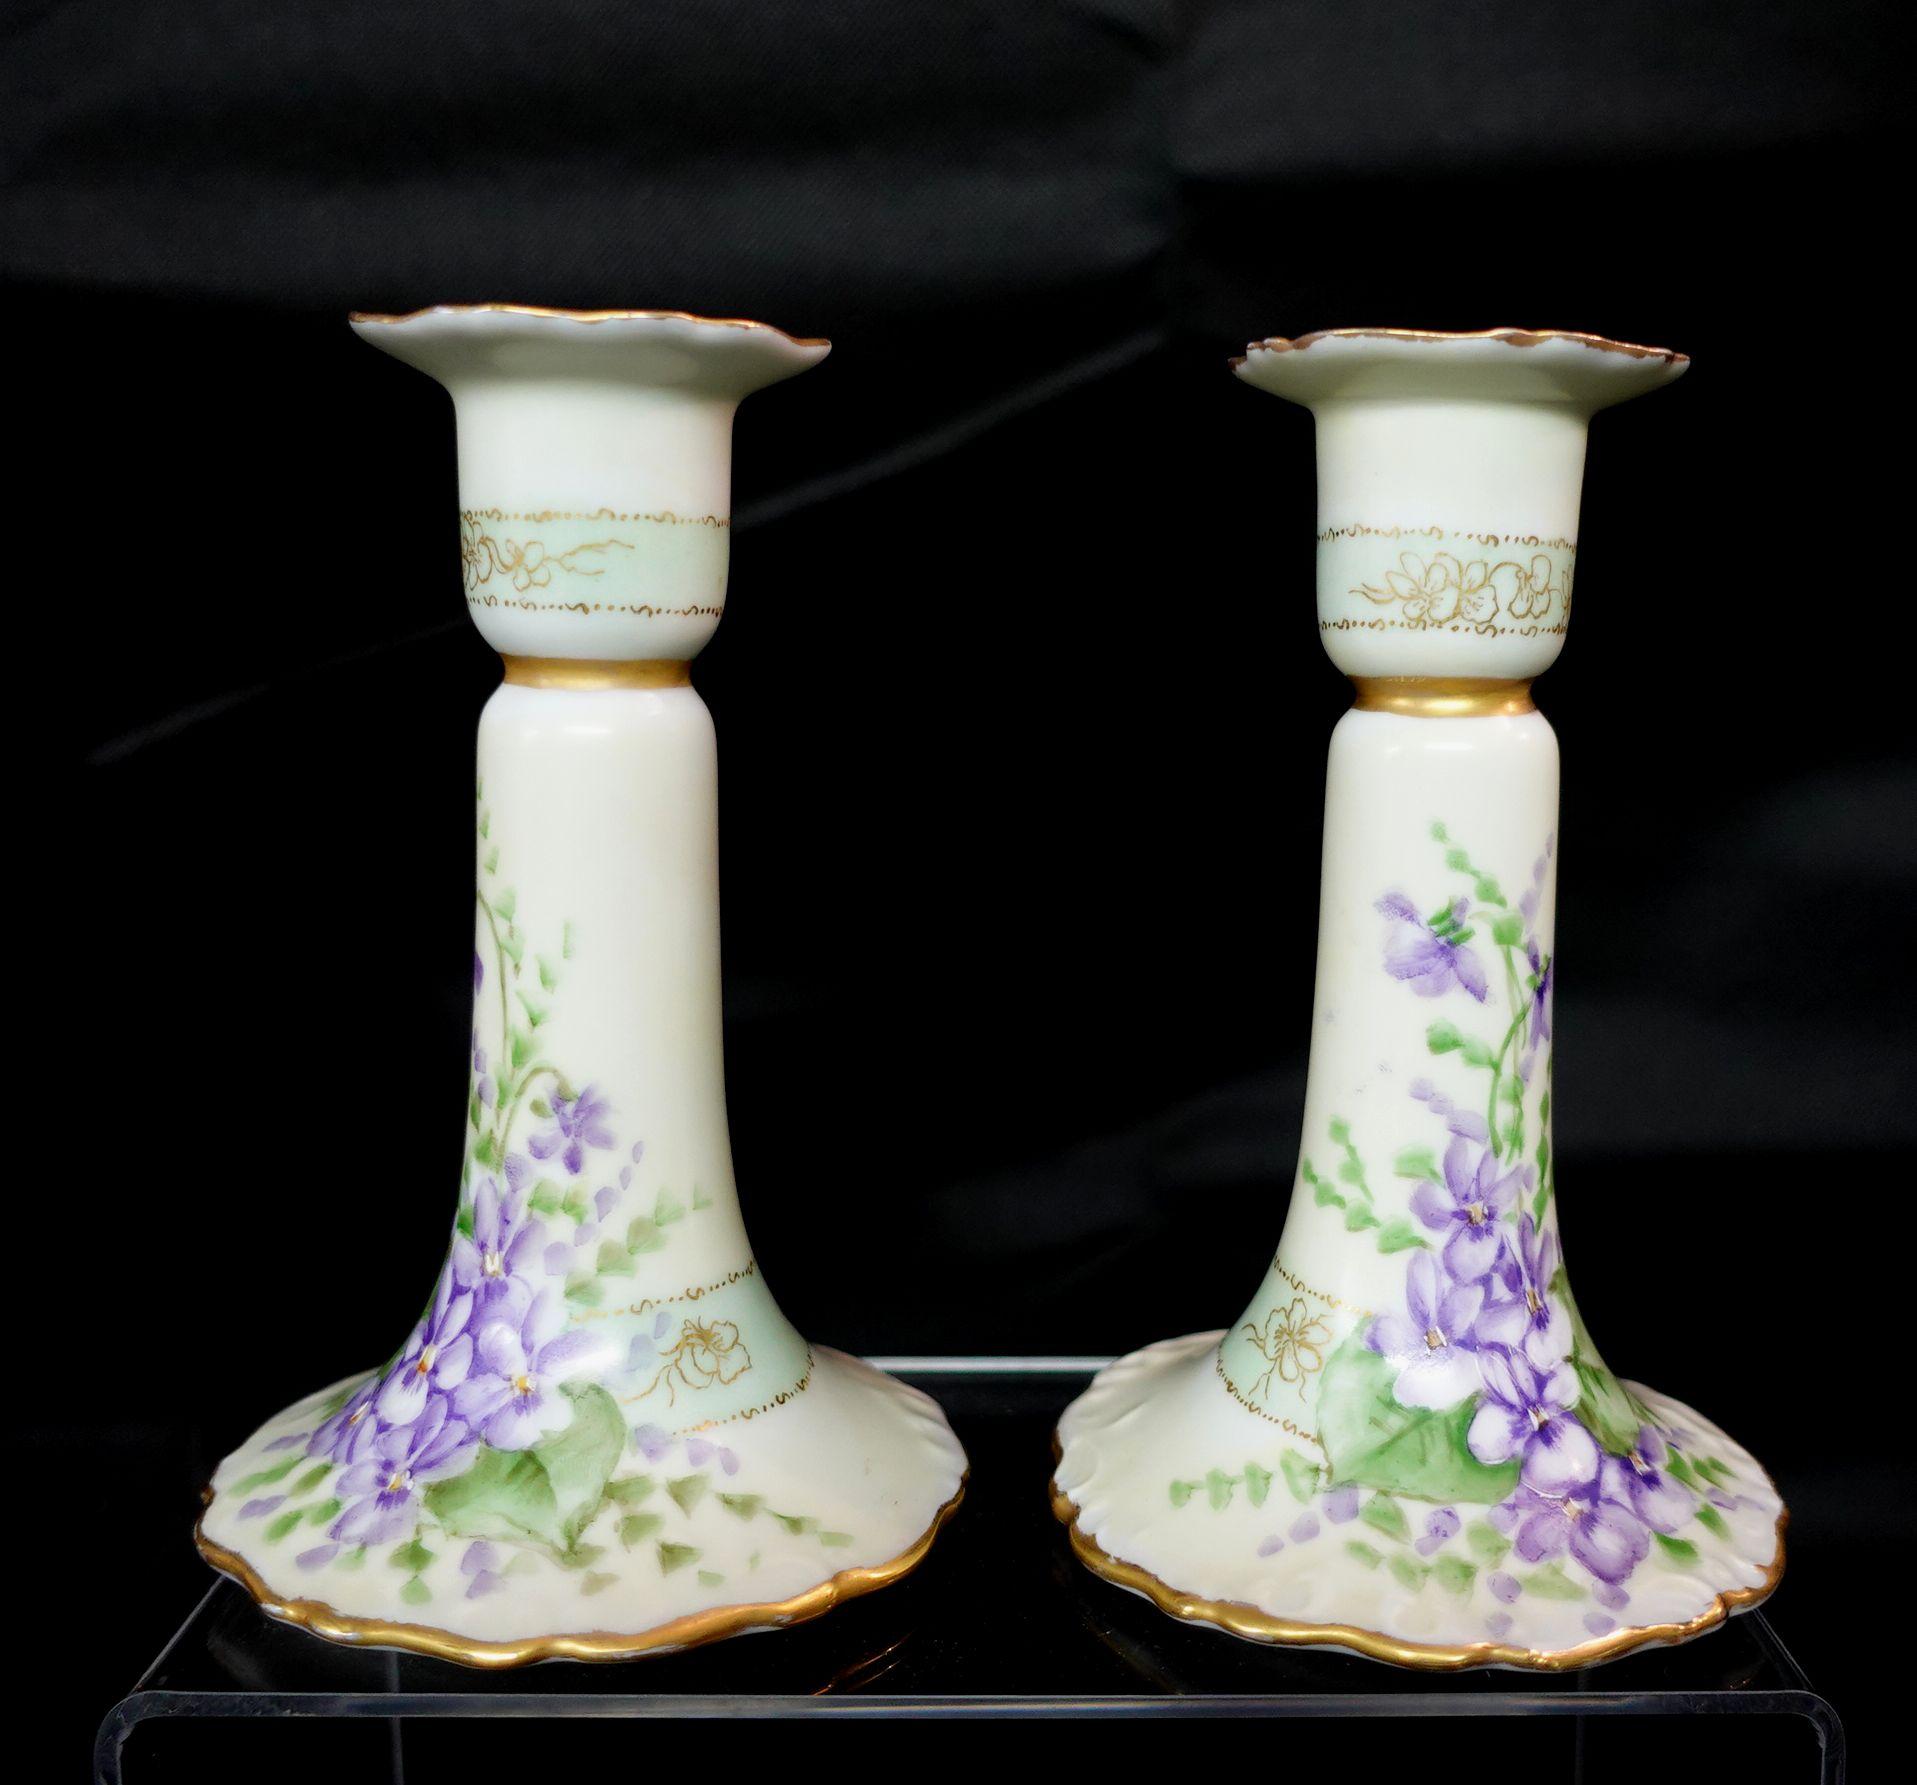 A wonderful antique pair of bavarian German candle sticks with floral pattern and gilt line art finishing.
   